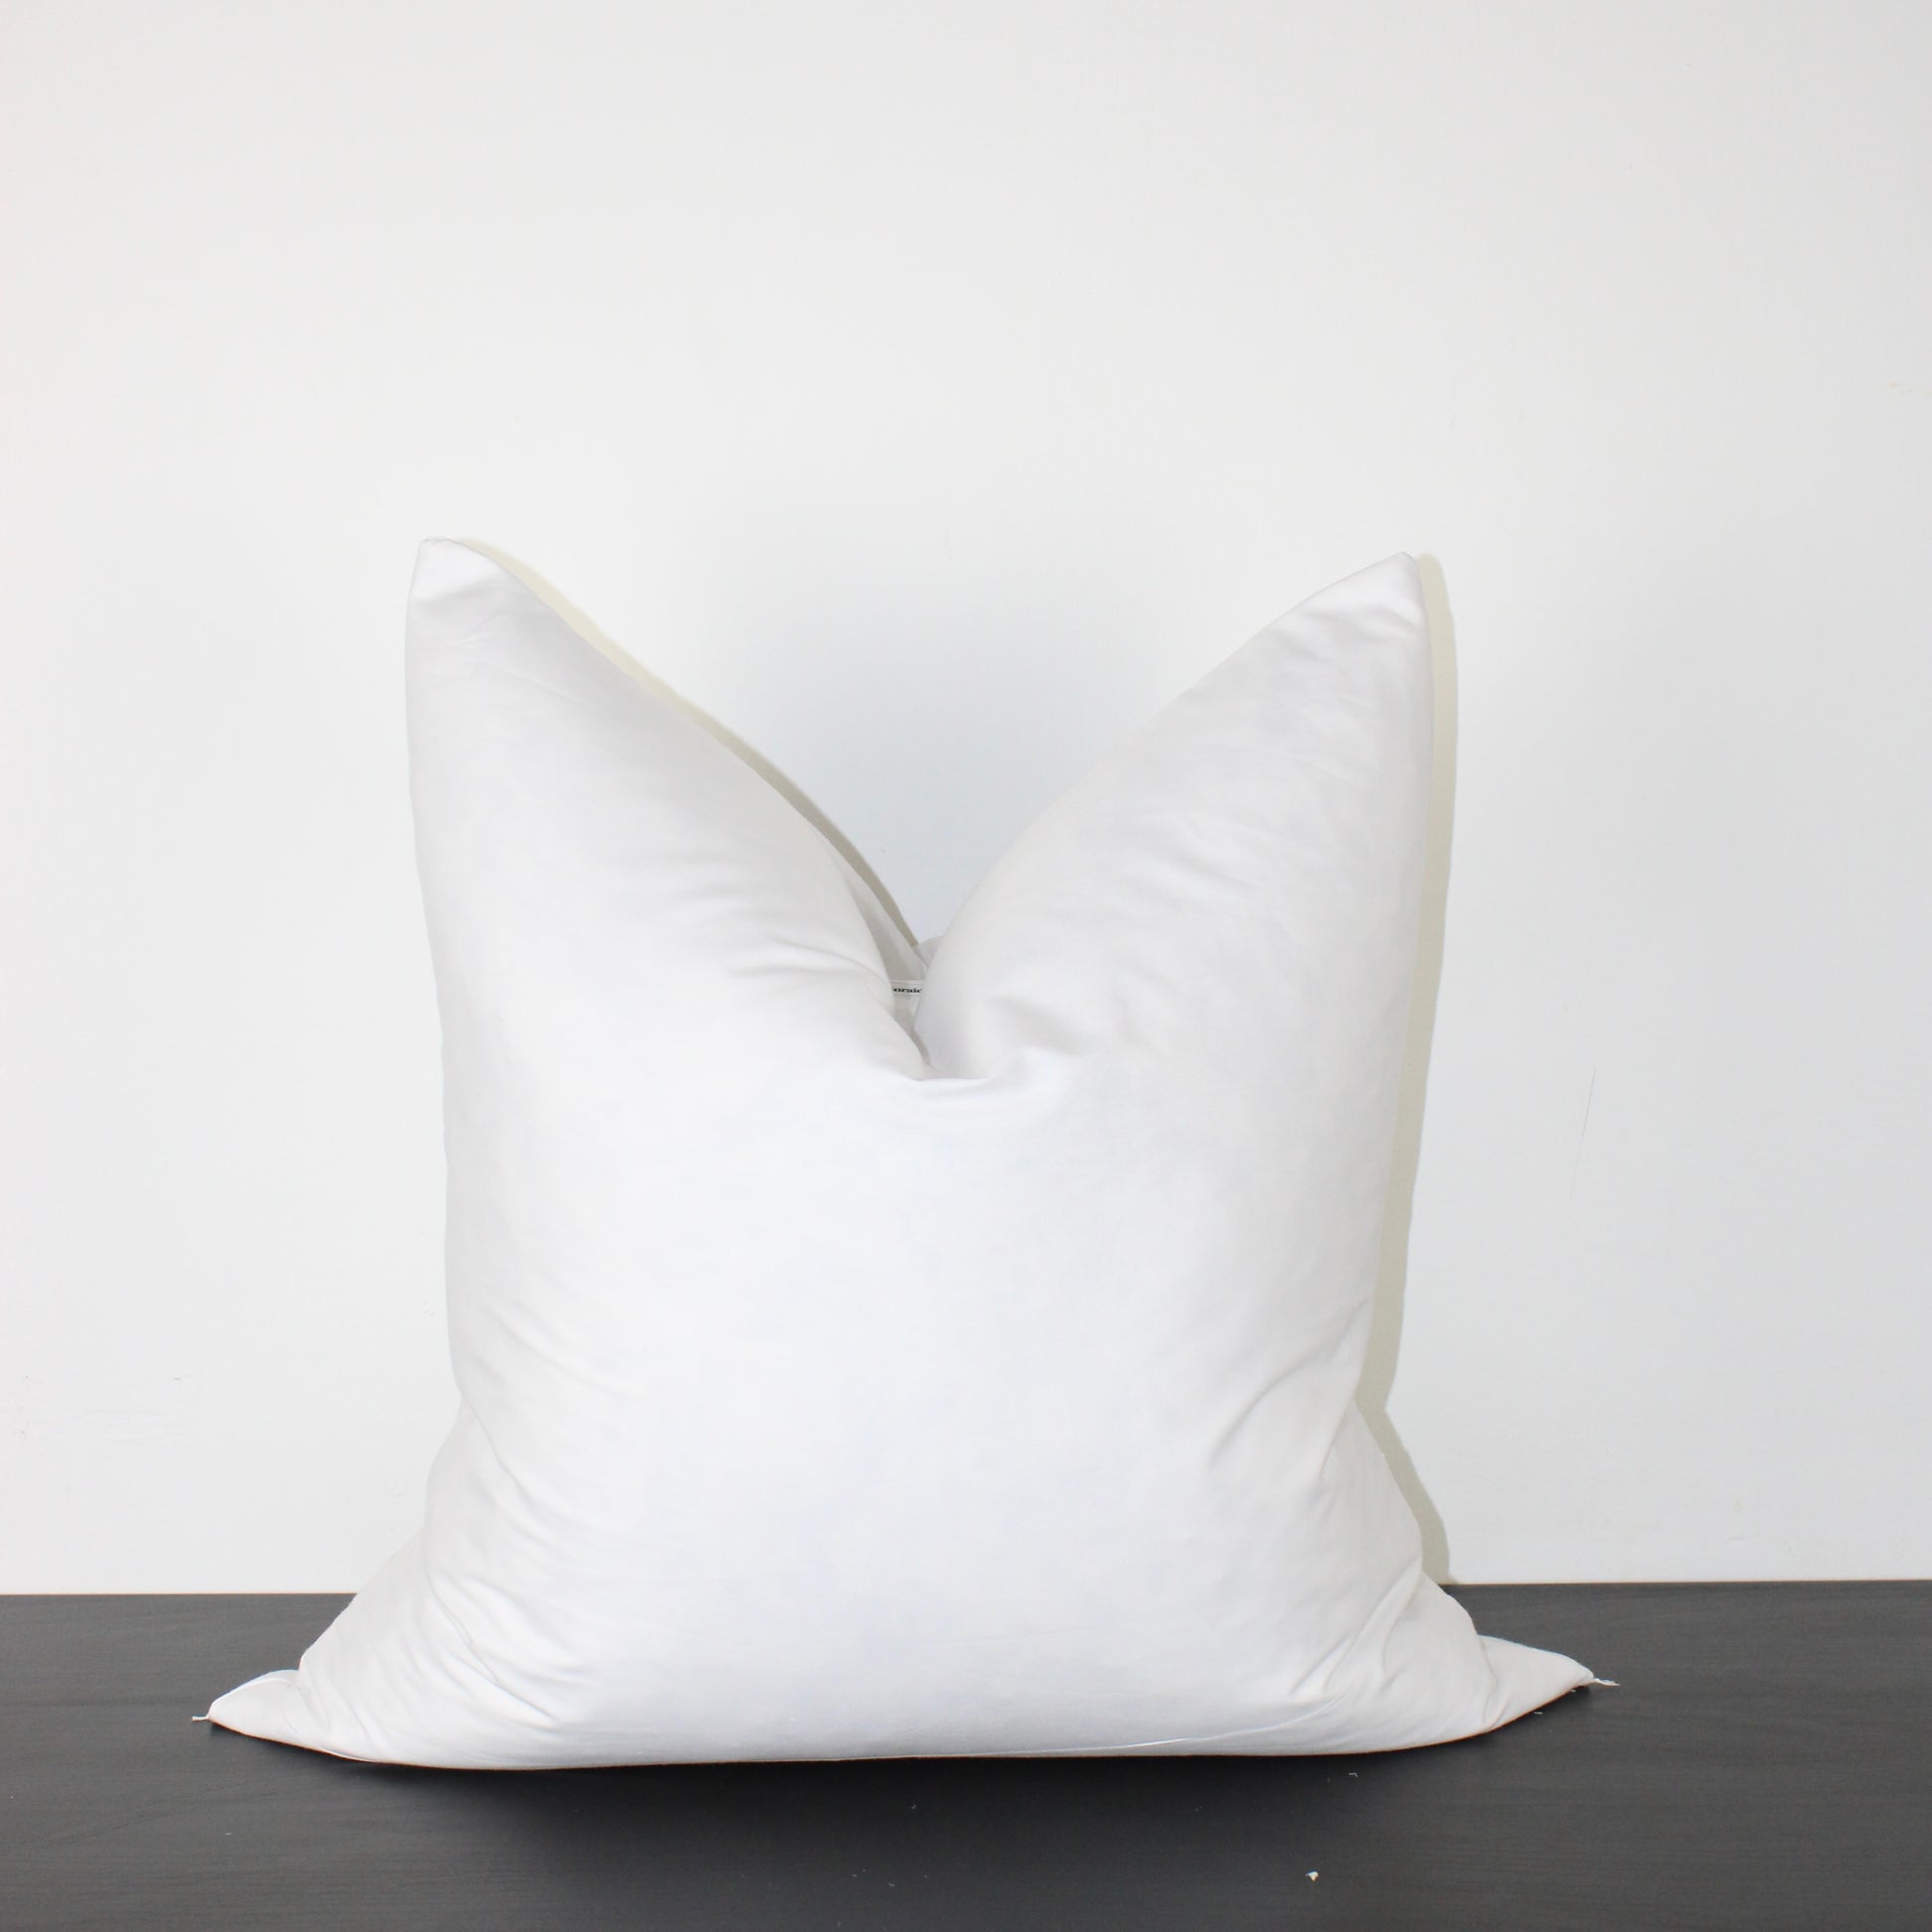 Quality pillow inserts 16x16 For Comfort and Relaxation 